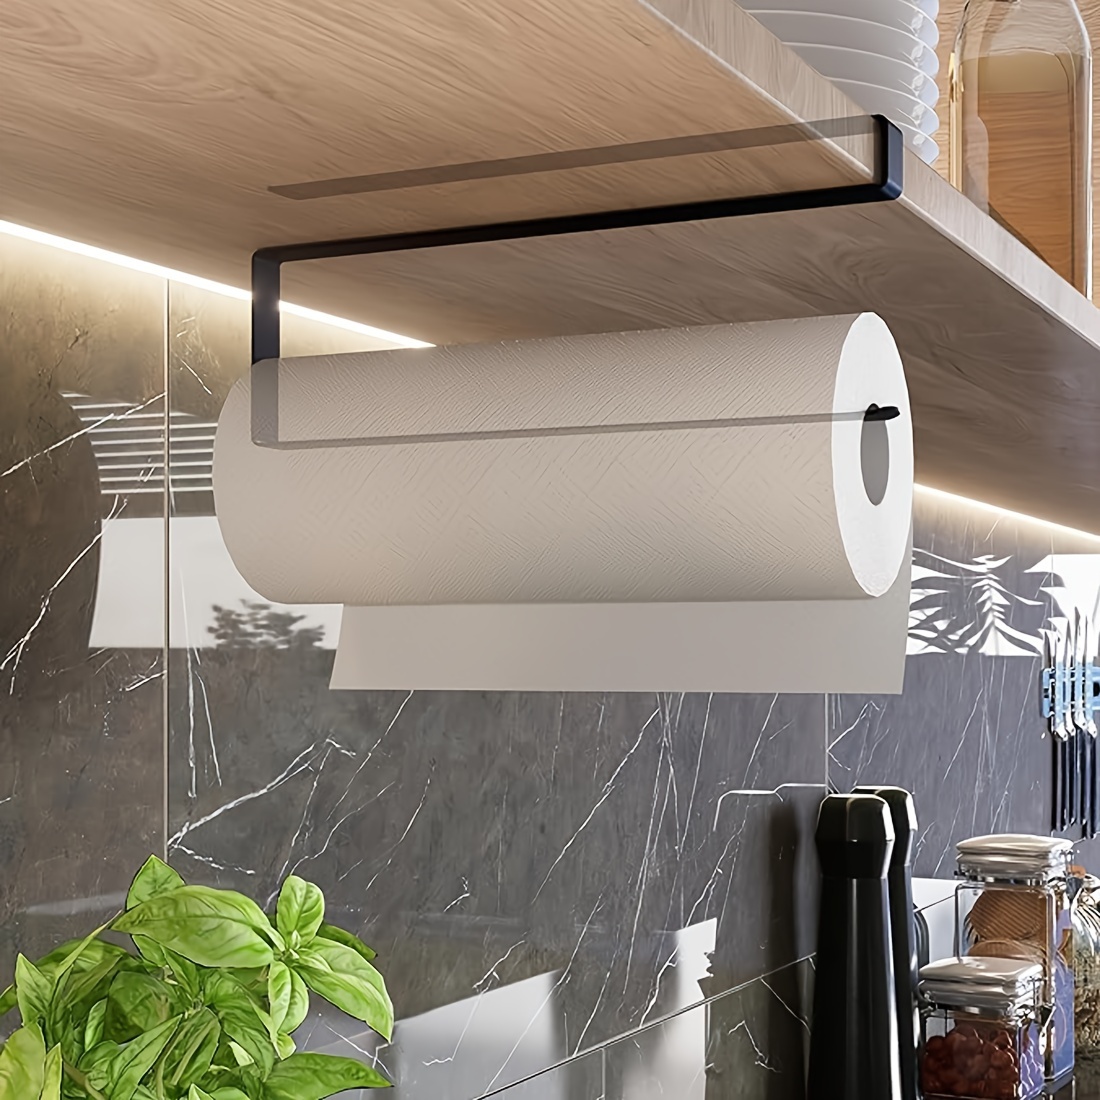 

1pc Under Cabinet Kitchen Roll Holder, No Drilling Required, Space Saving, Modern Stainless Steel Paper Towel Rack, Durable Wrought Iron, Thickened Flat Wire With Rounded Edges & Tall Hook Design